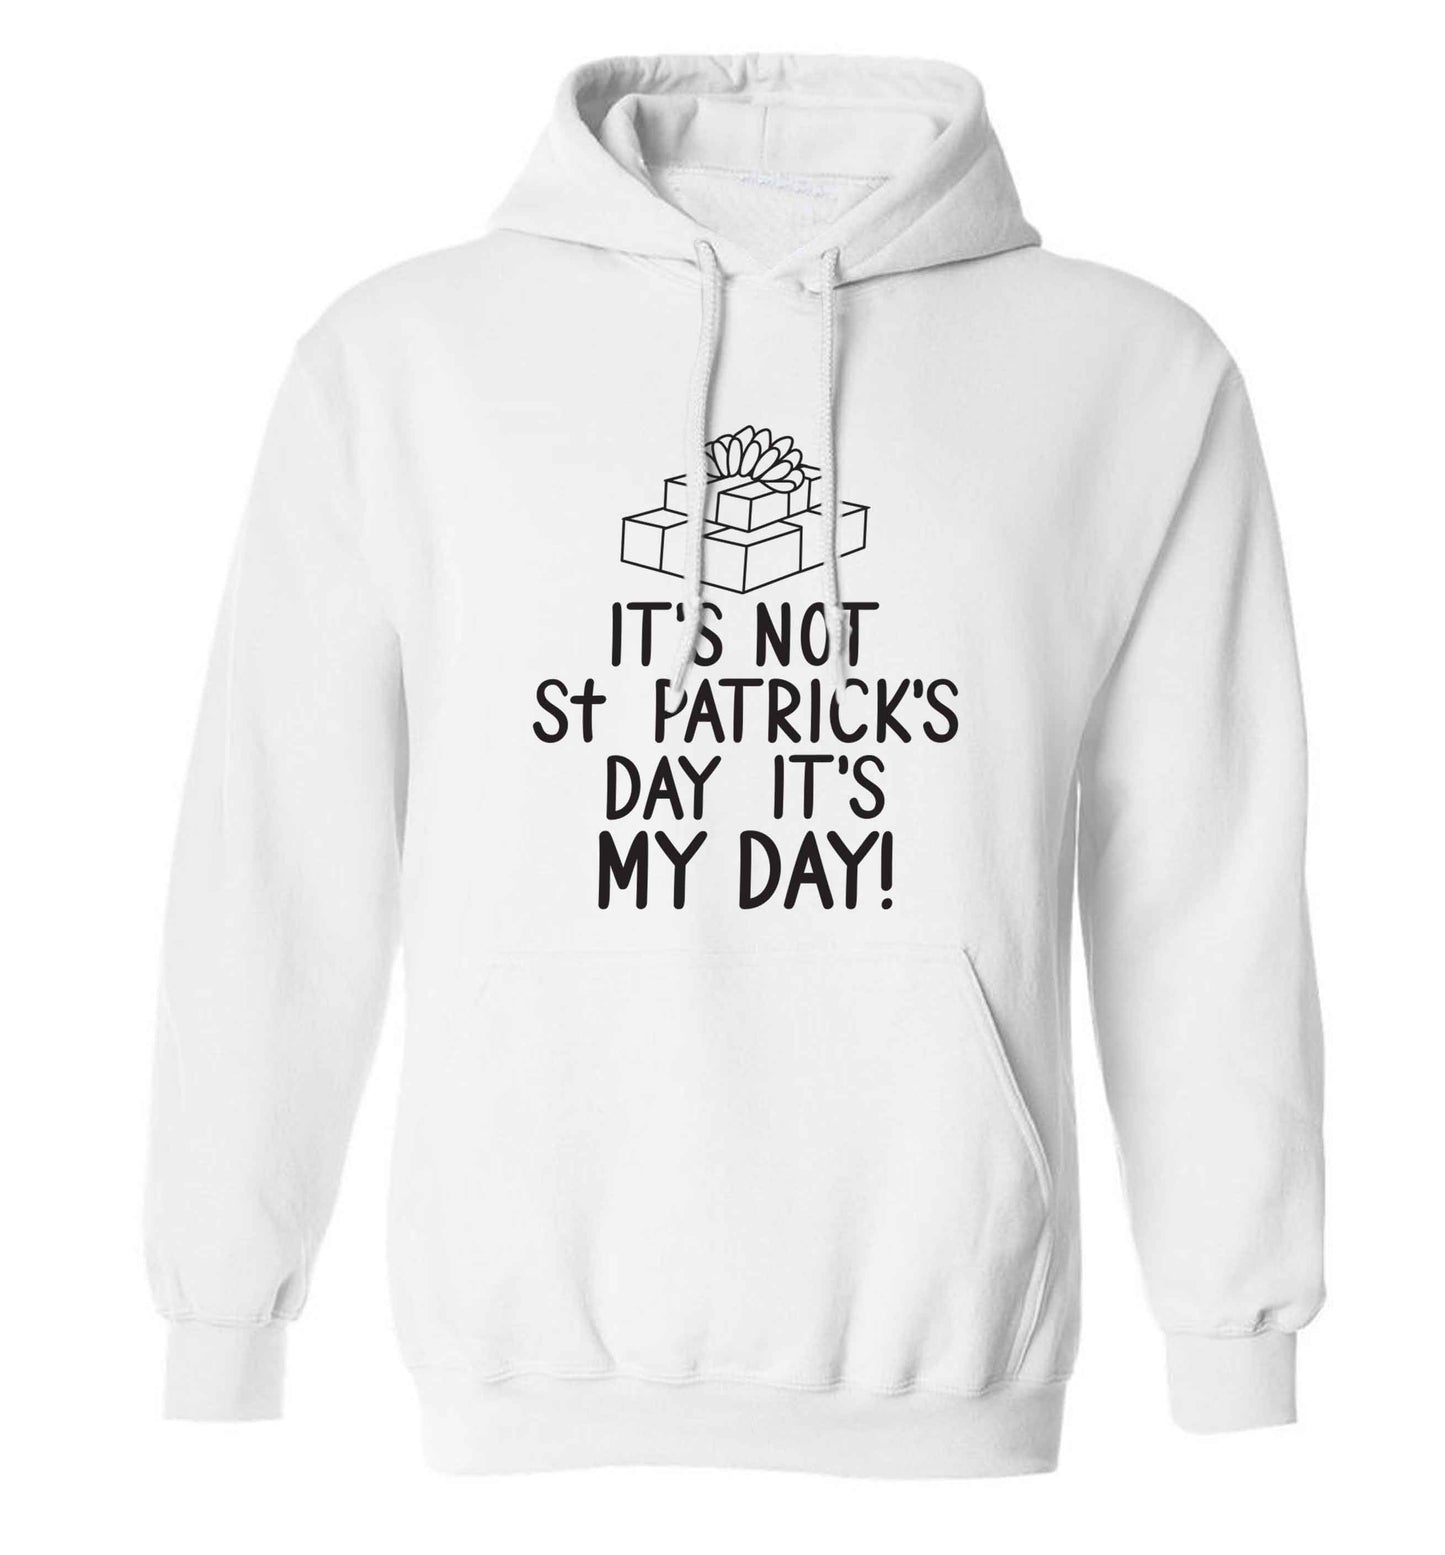 Funny gifts for your mum on mother's dayor her birthday! It's not St Patricks day it's my day adults unisex white hoodie 2XL